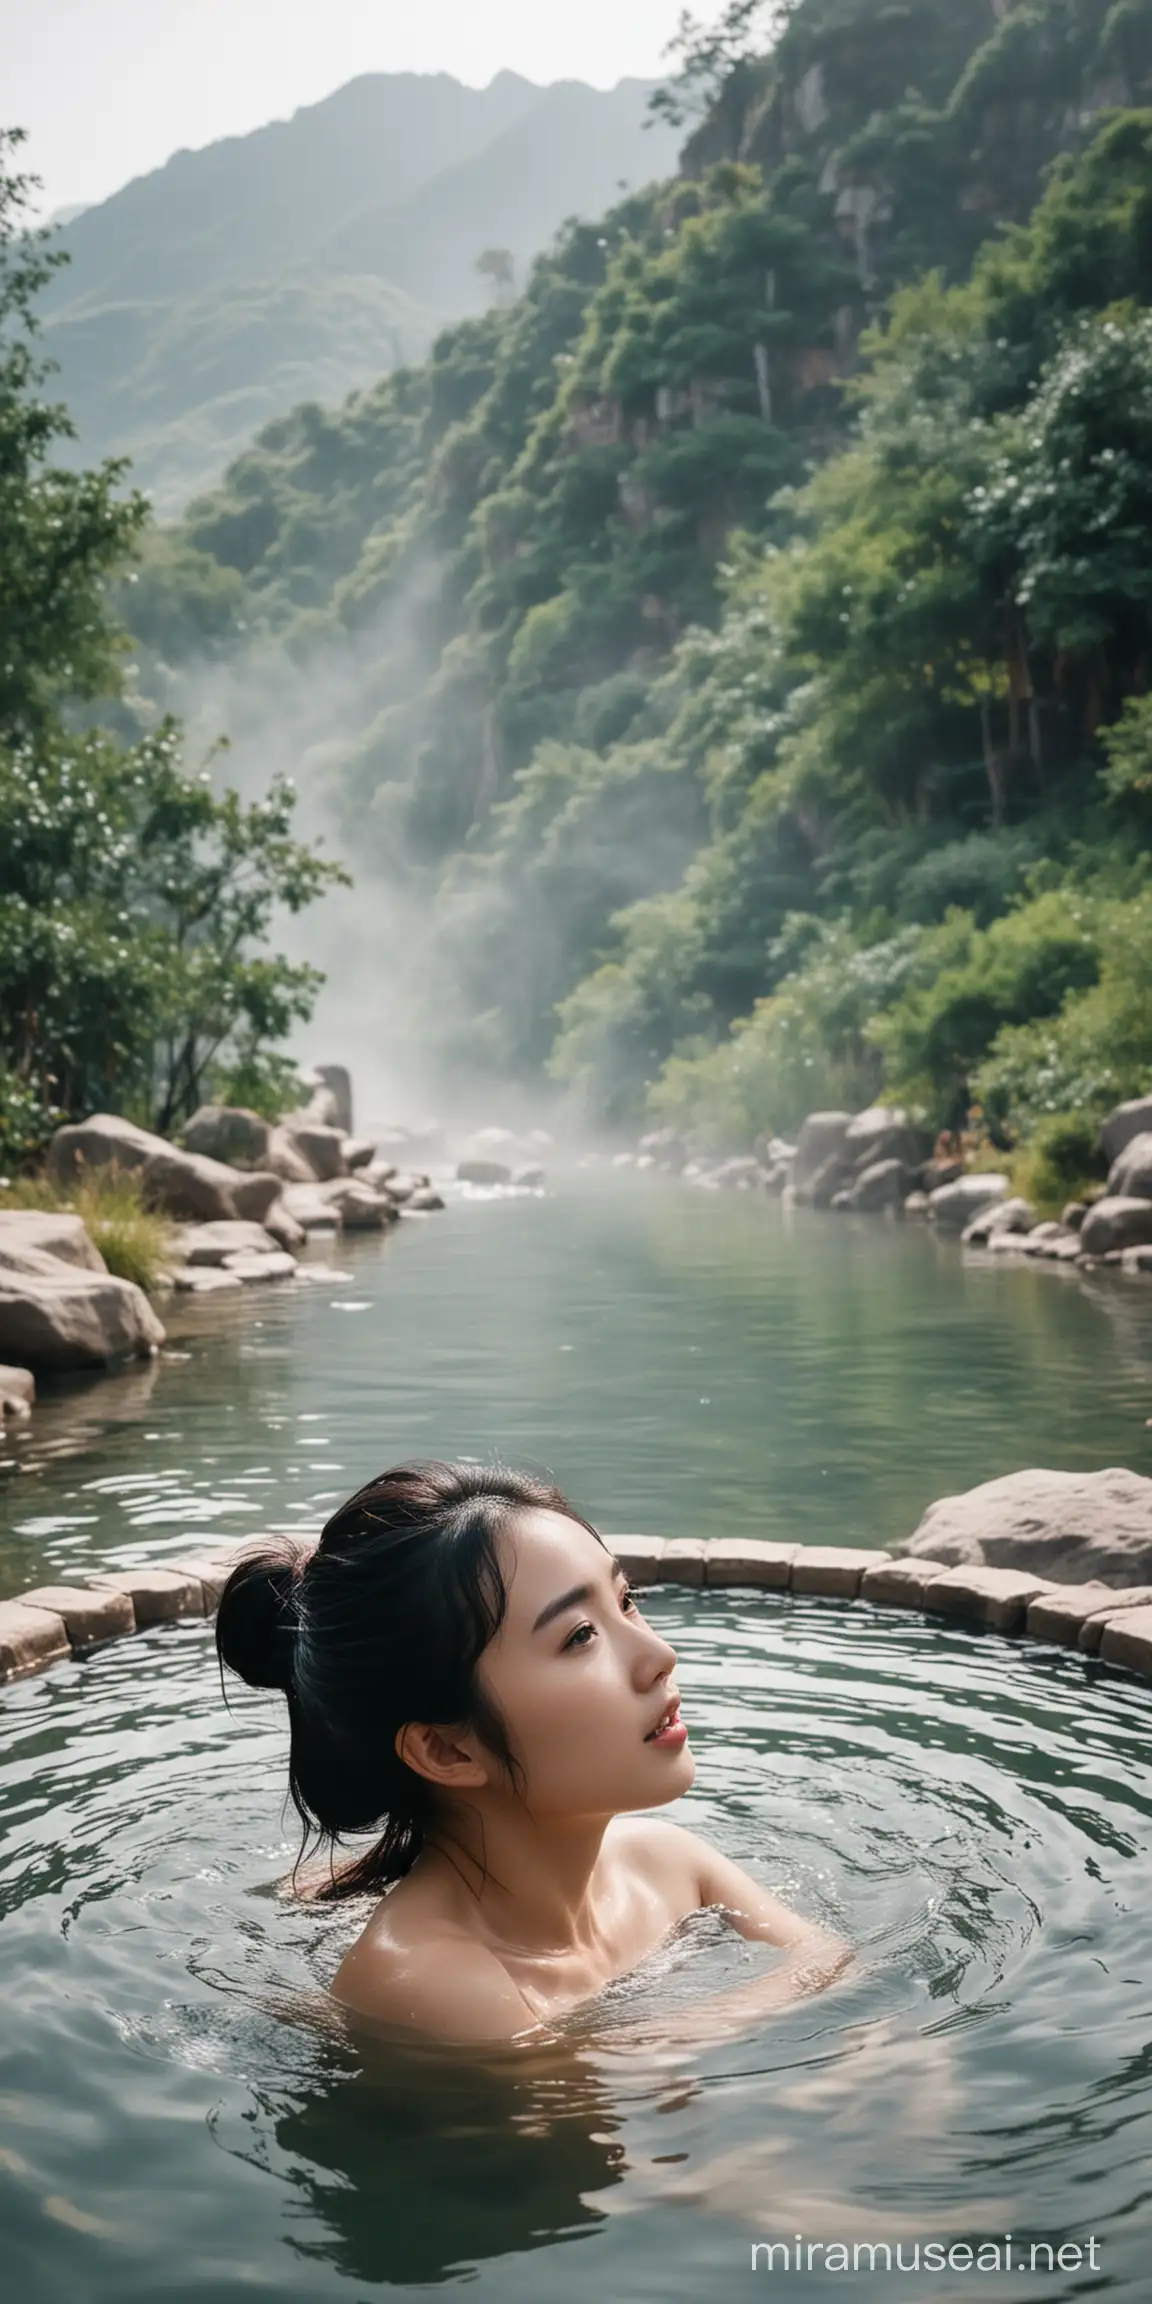 Young Woman Relaxing in Natural Hot Springs Amidst Scenic Beauty